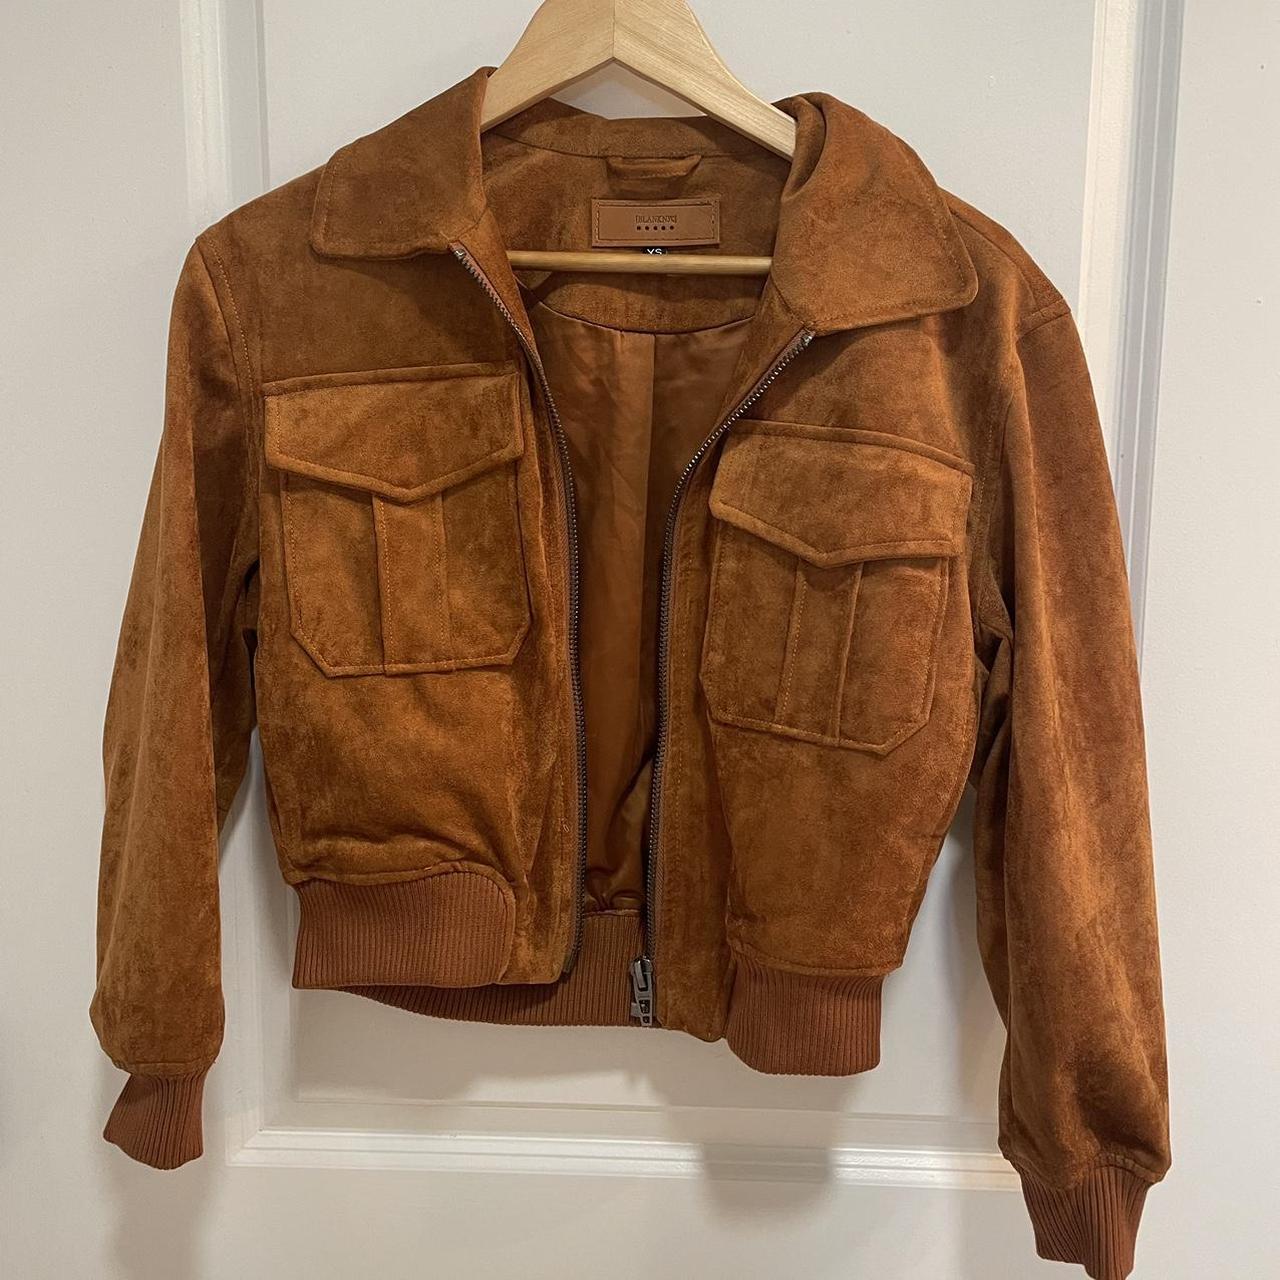 Blank NYC Women's Tan and Brown Jacket (2)